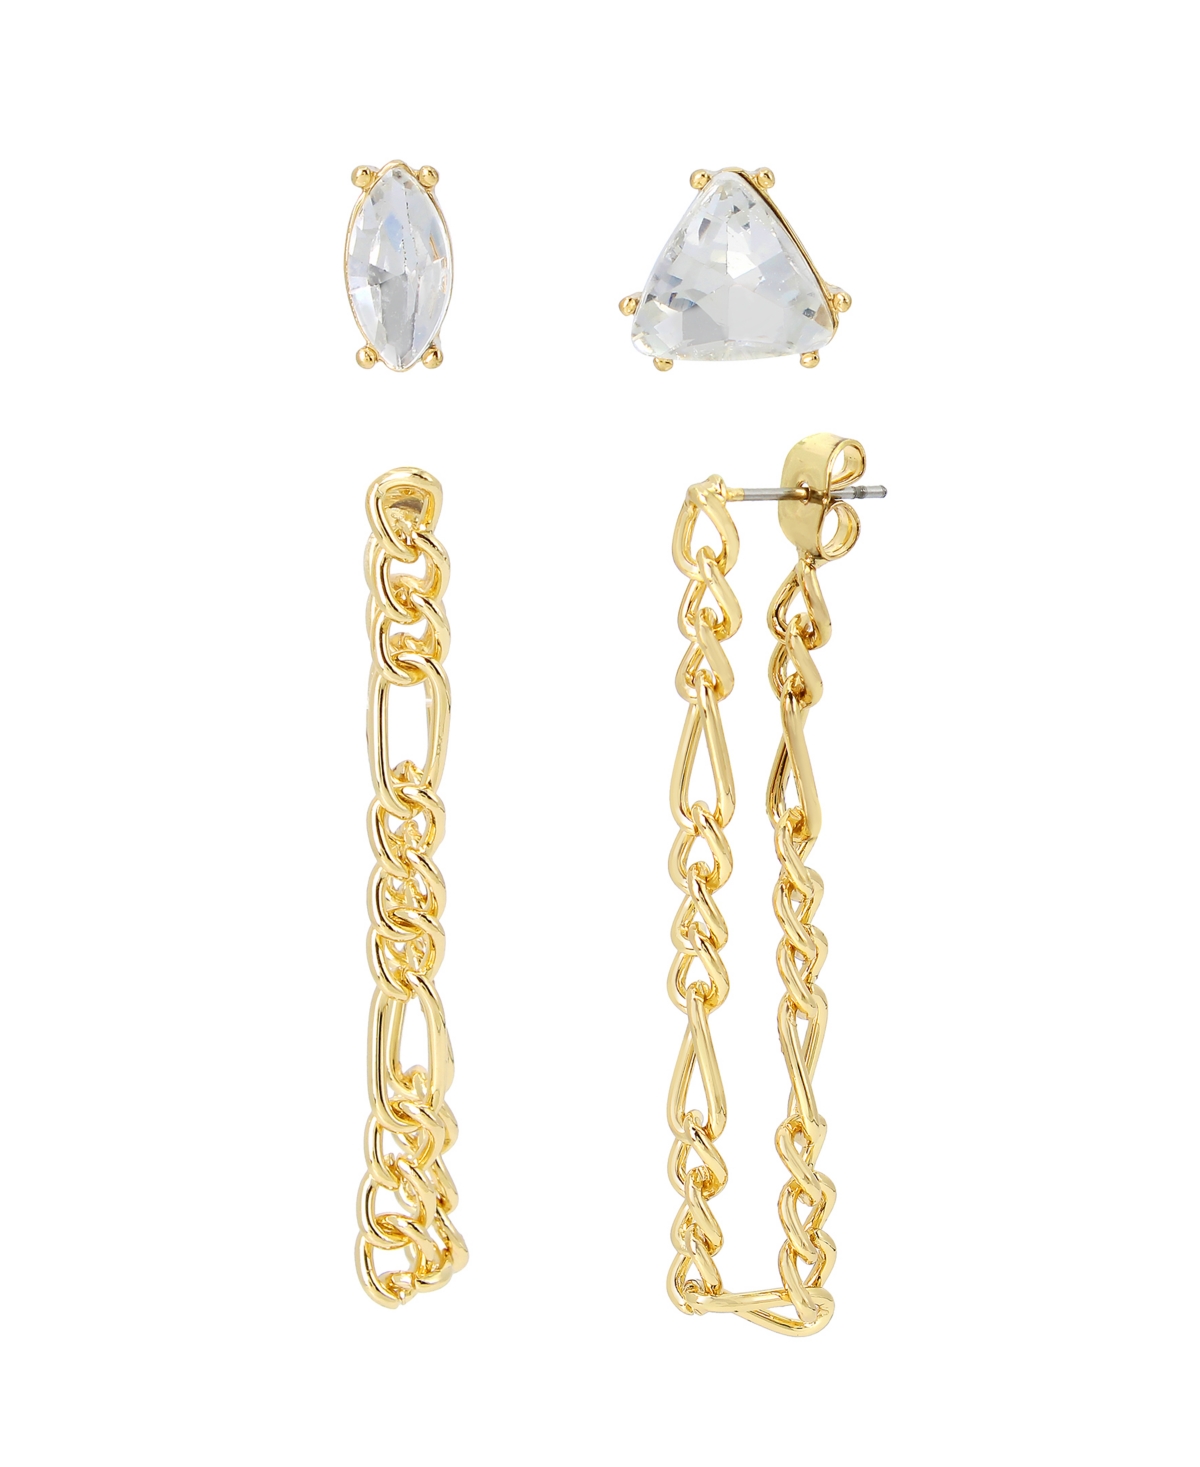 Stone Front Back Earrings Set, 4 Piece - Crystal, Gold-Tone